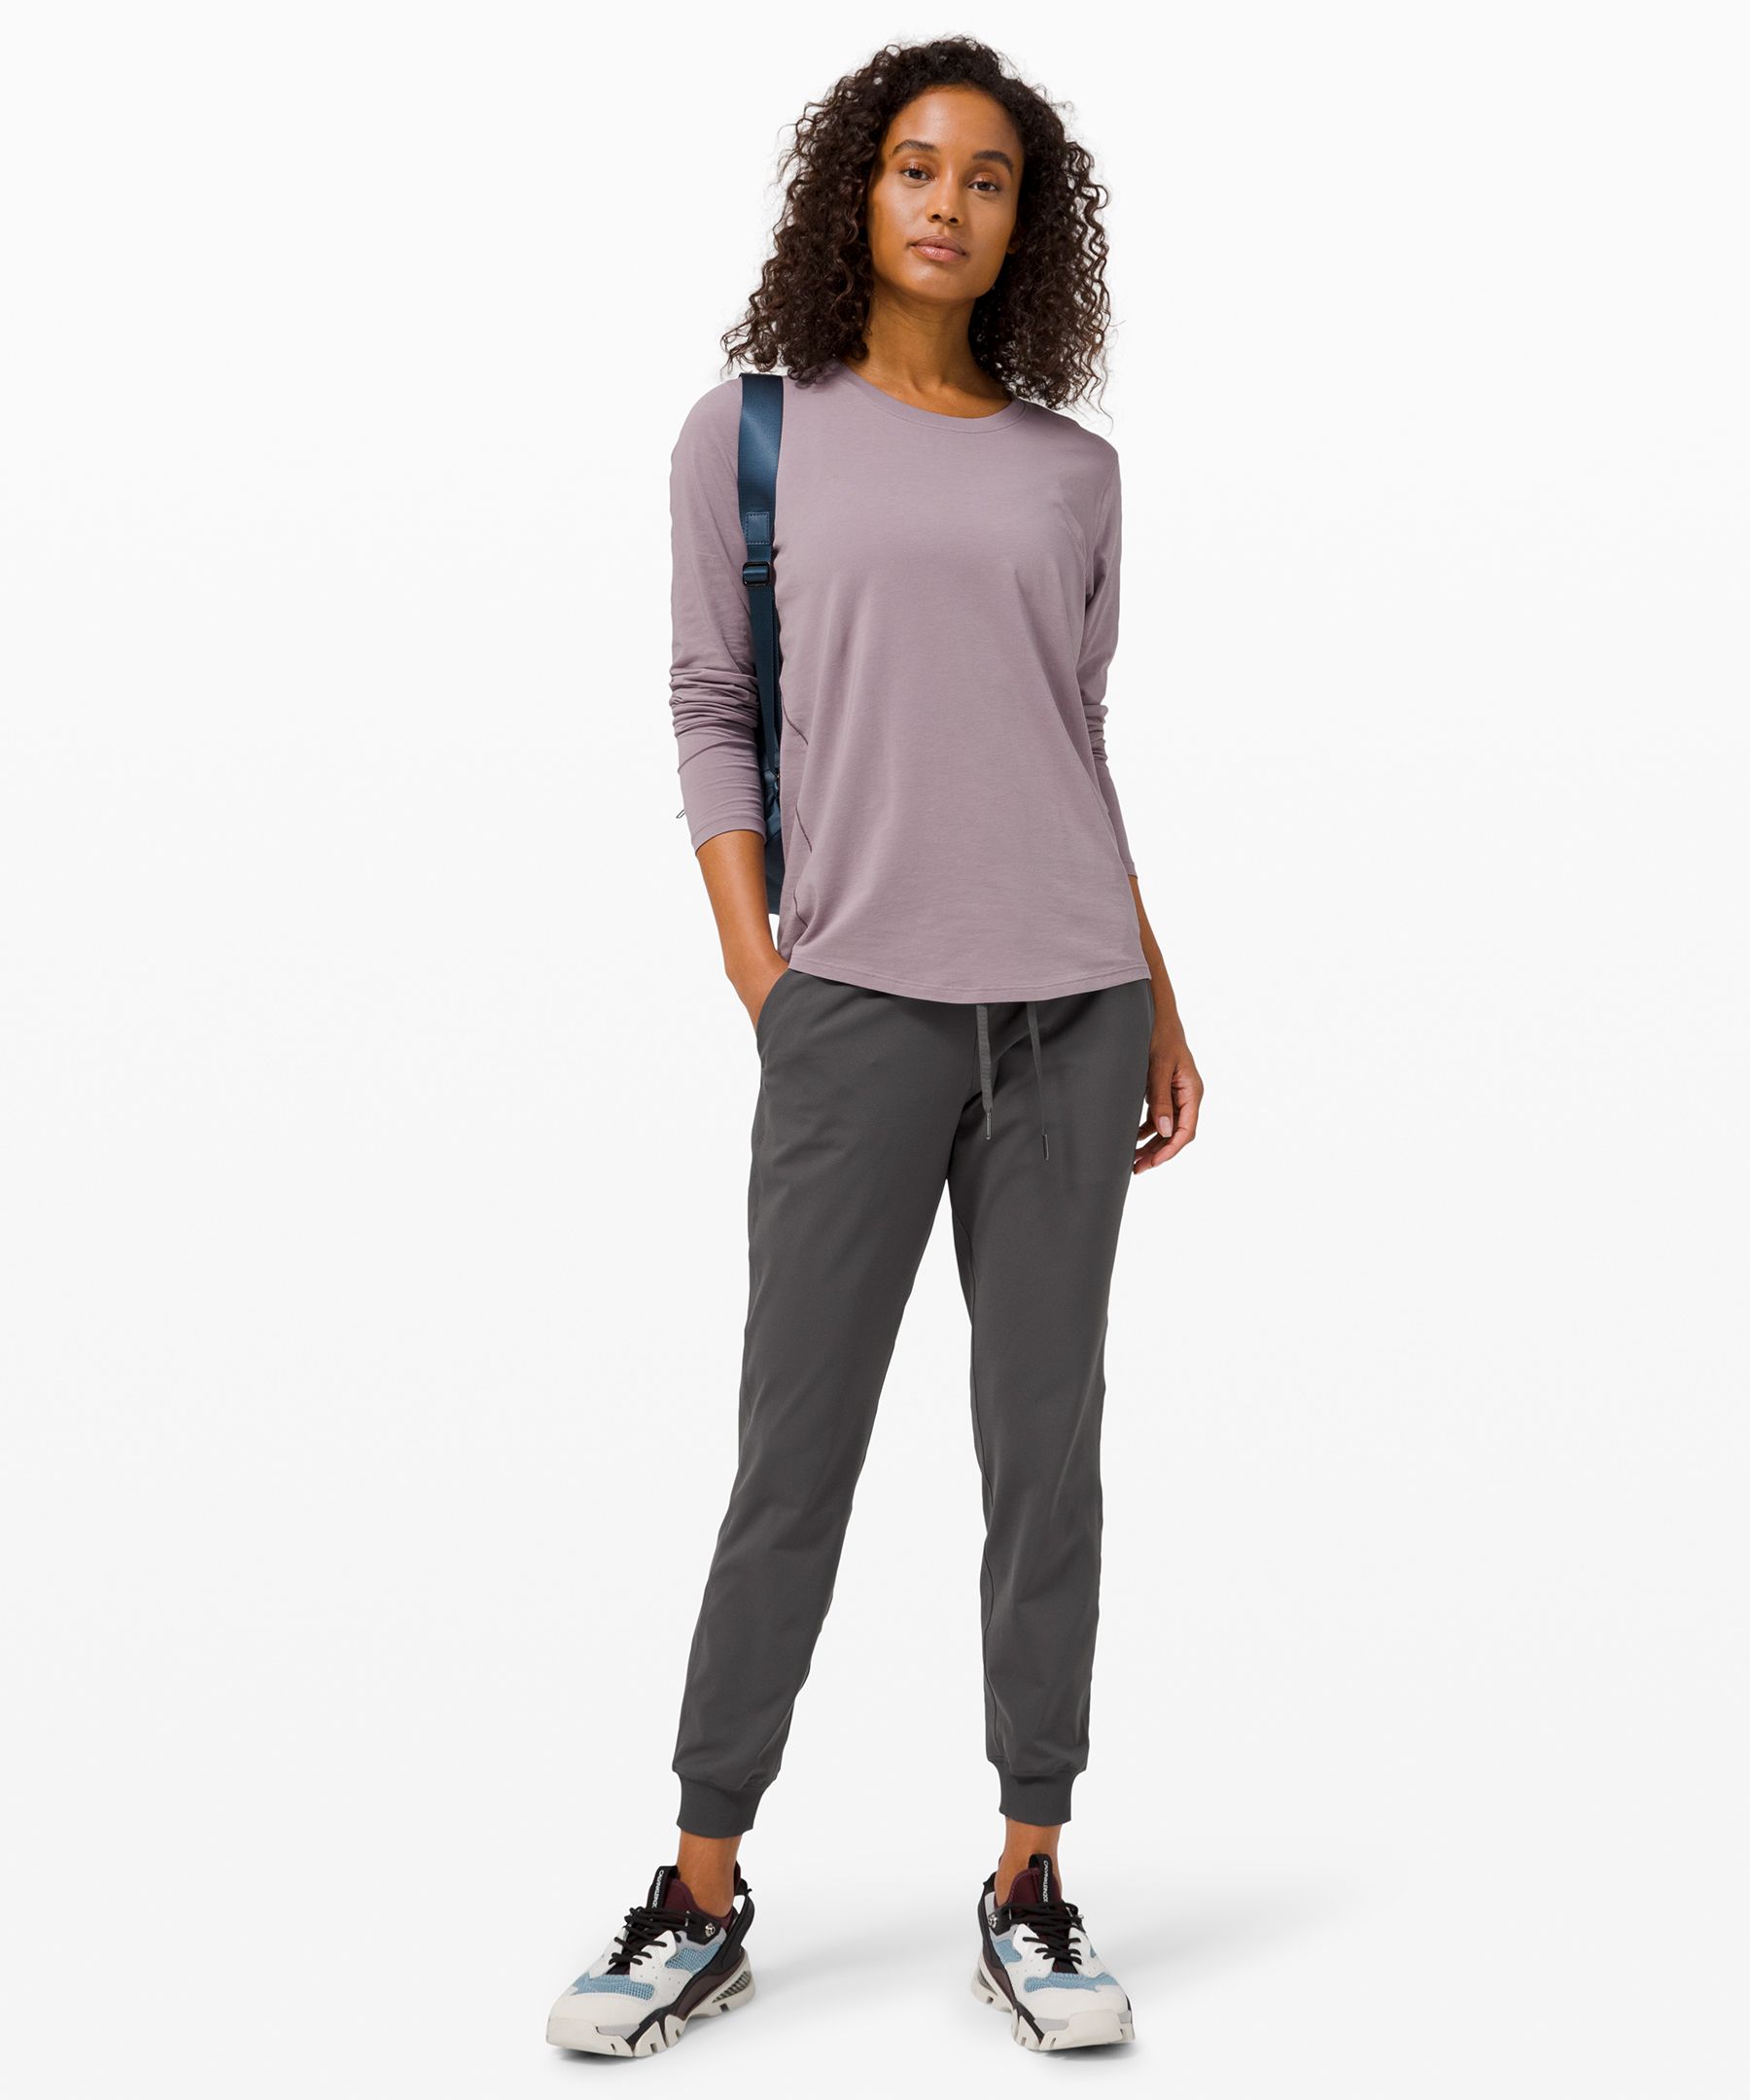 On the Fly Jogger 28 *Full-On Luxtreme